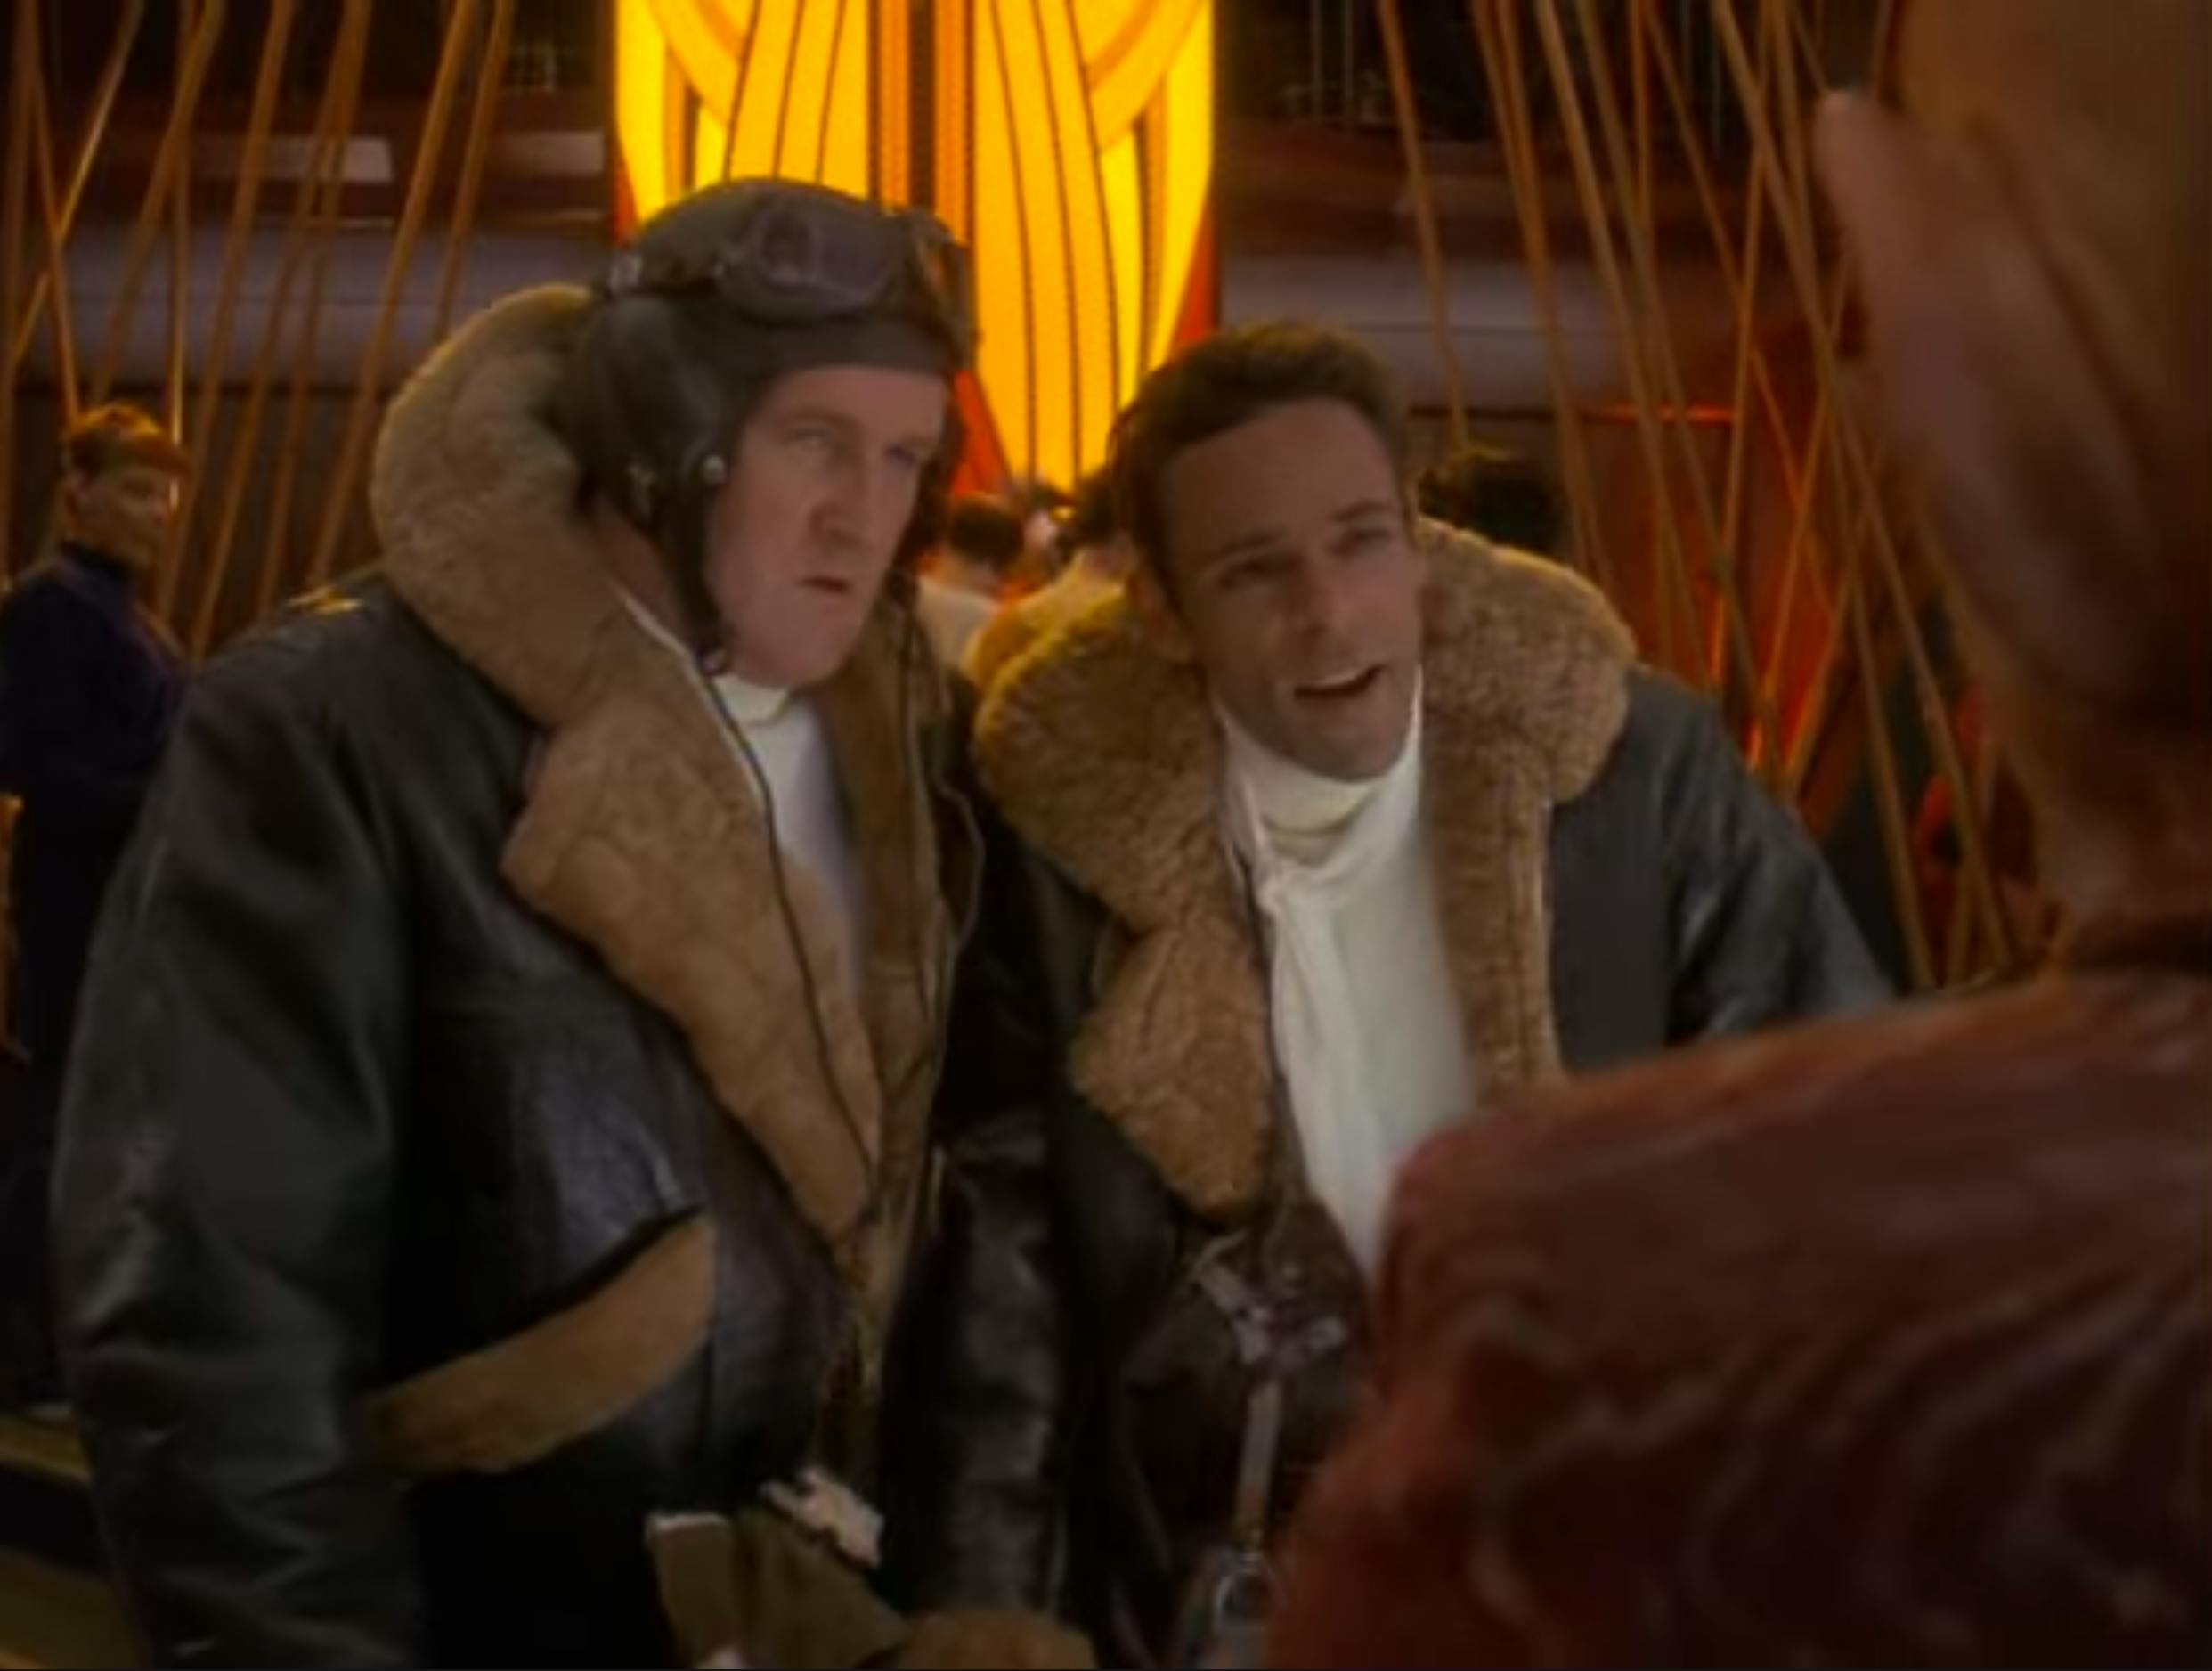 Miles and Julian in aviator clothes after a visit to the Holosuite on Star Trek: Deep Space Nine